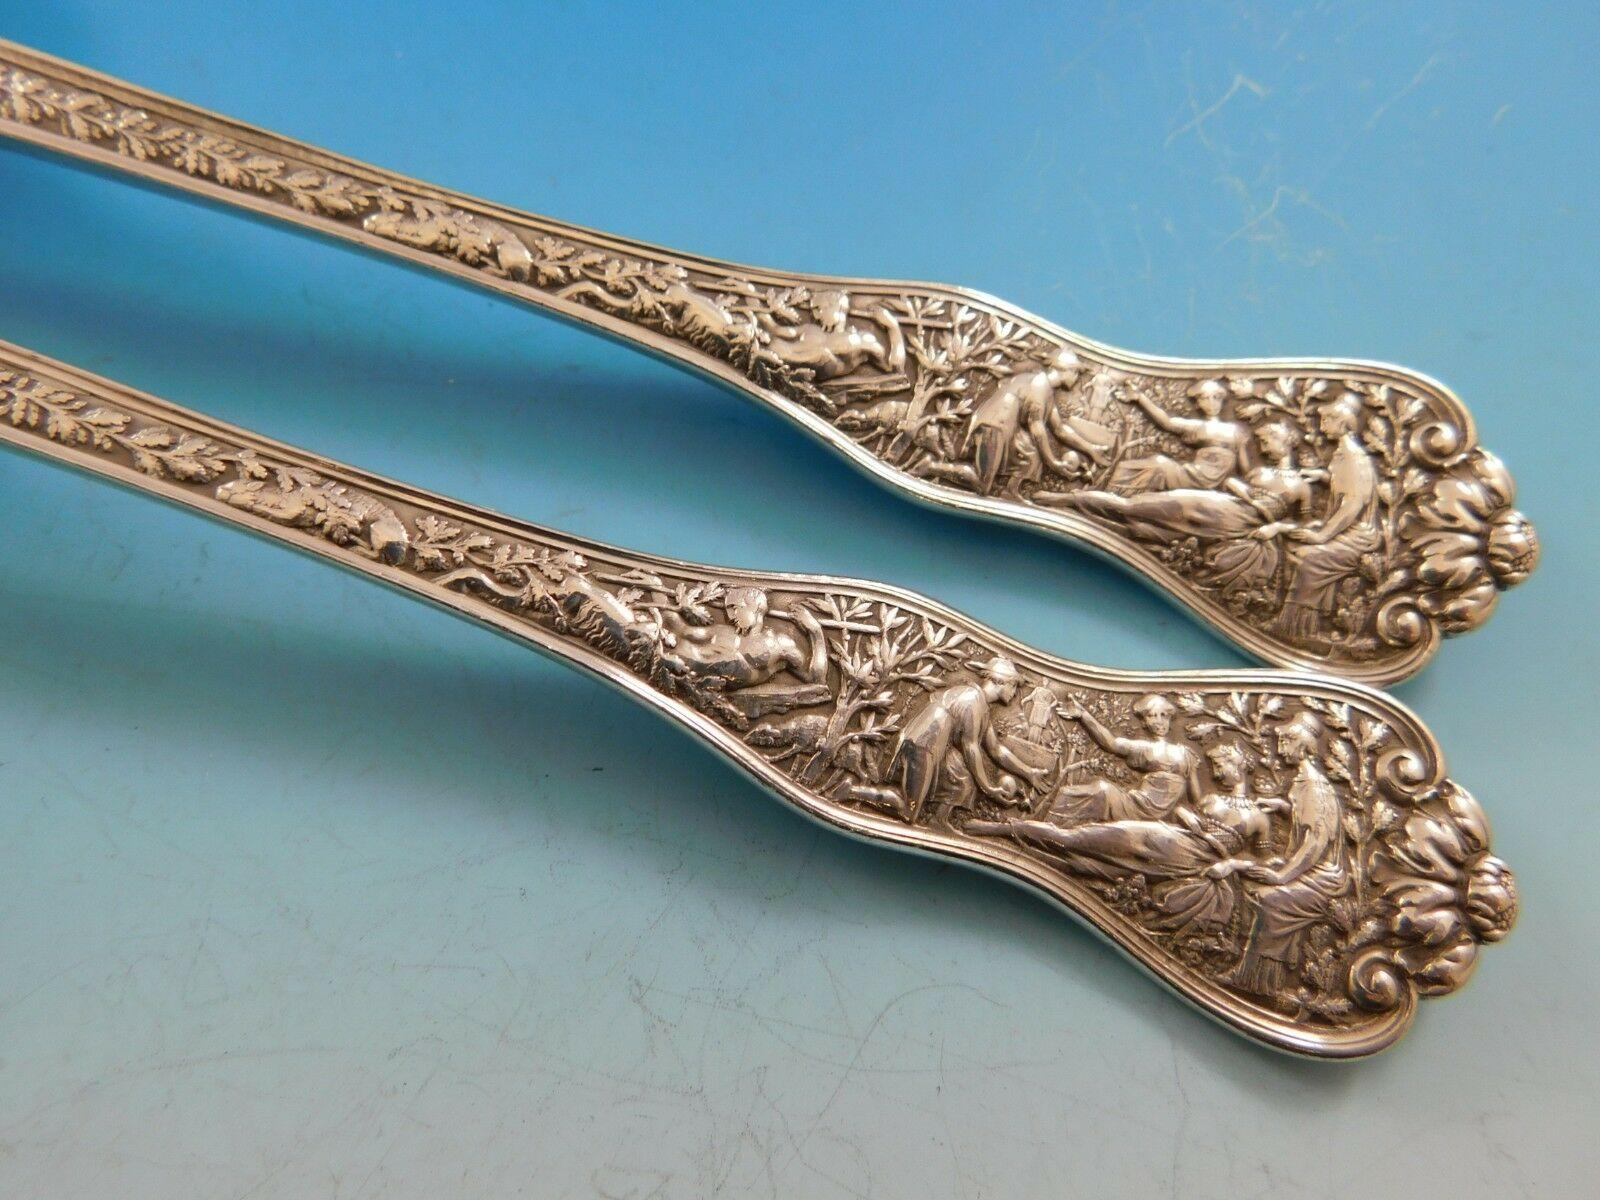 The Olympian pattern, which was introduced by Tiffany & Co. in 1878, is the most elaborate and complex of all Tiffany flatware designs. Each piece of Olympian is designed to illustrate a well-known story of classical mythology. The subjects vary